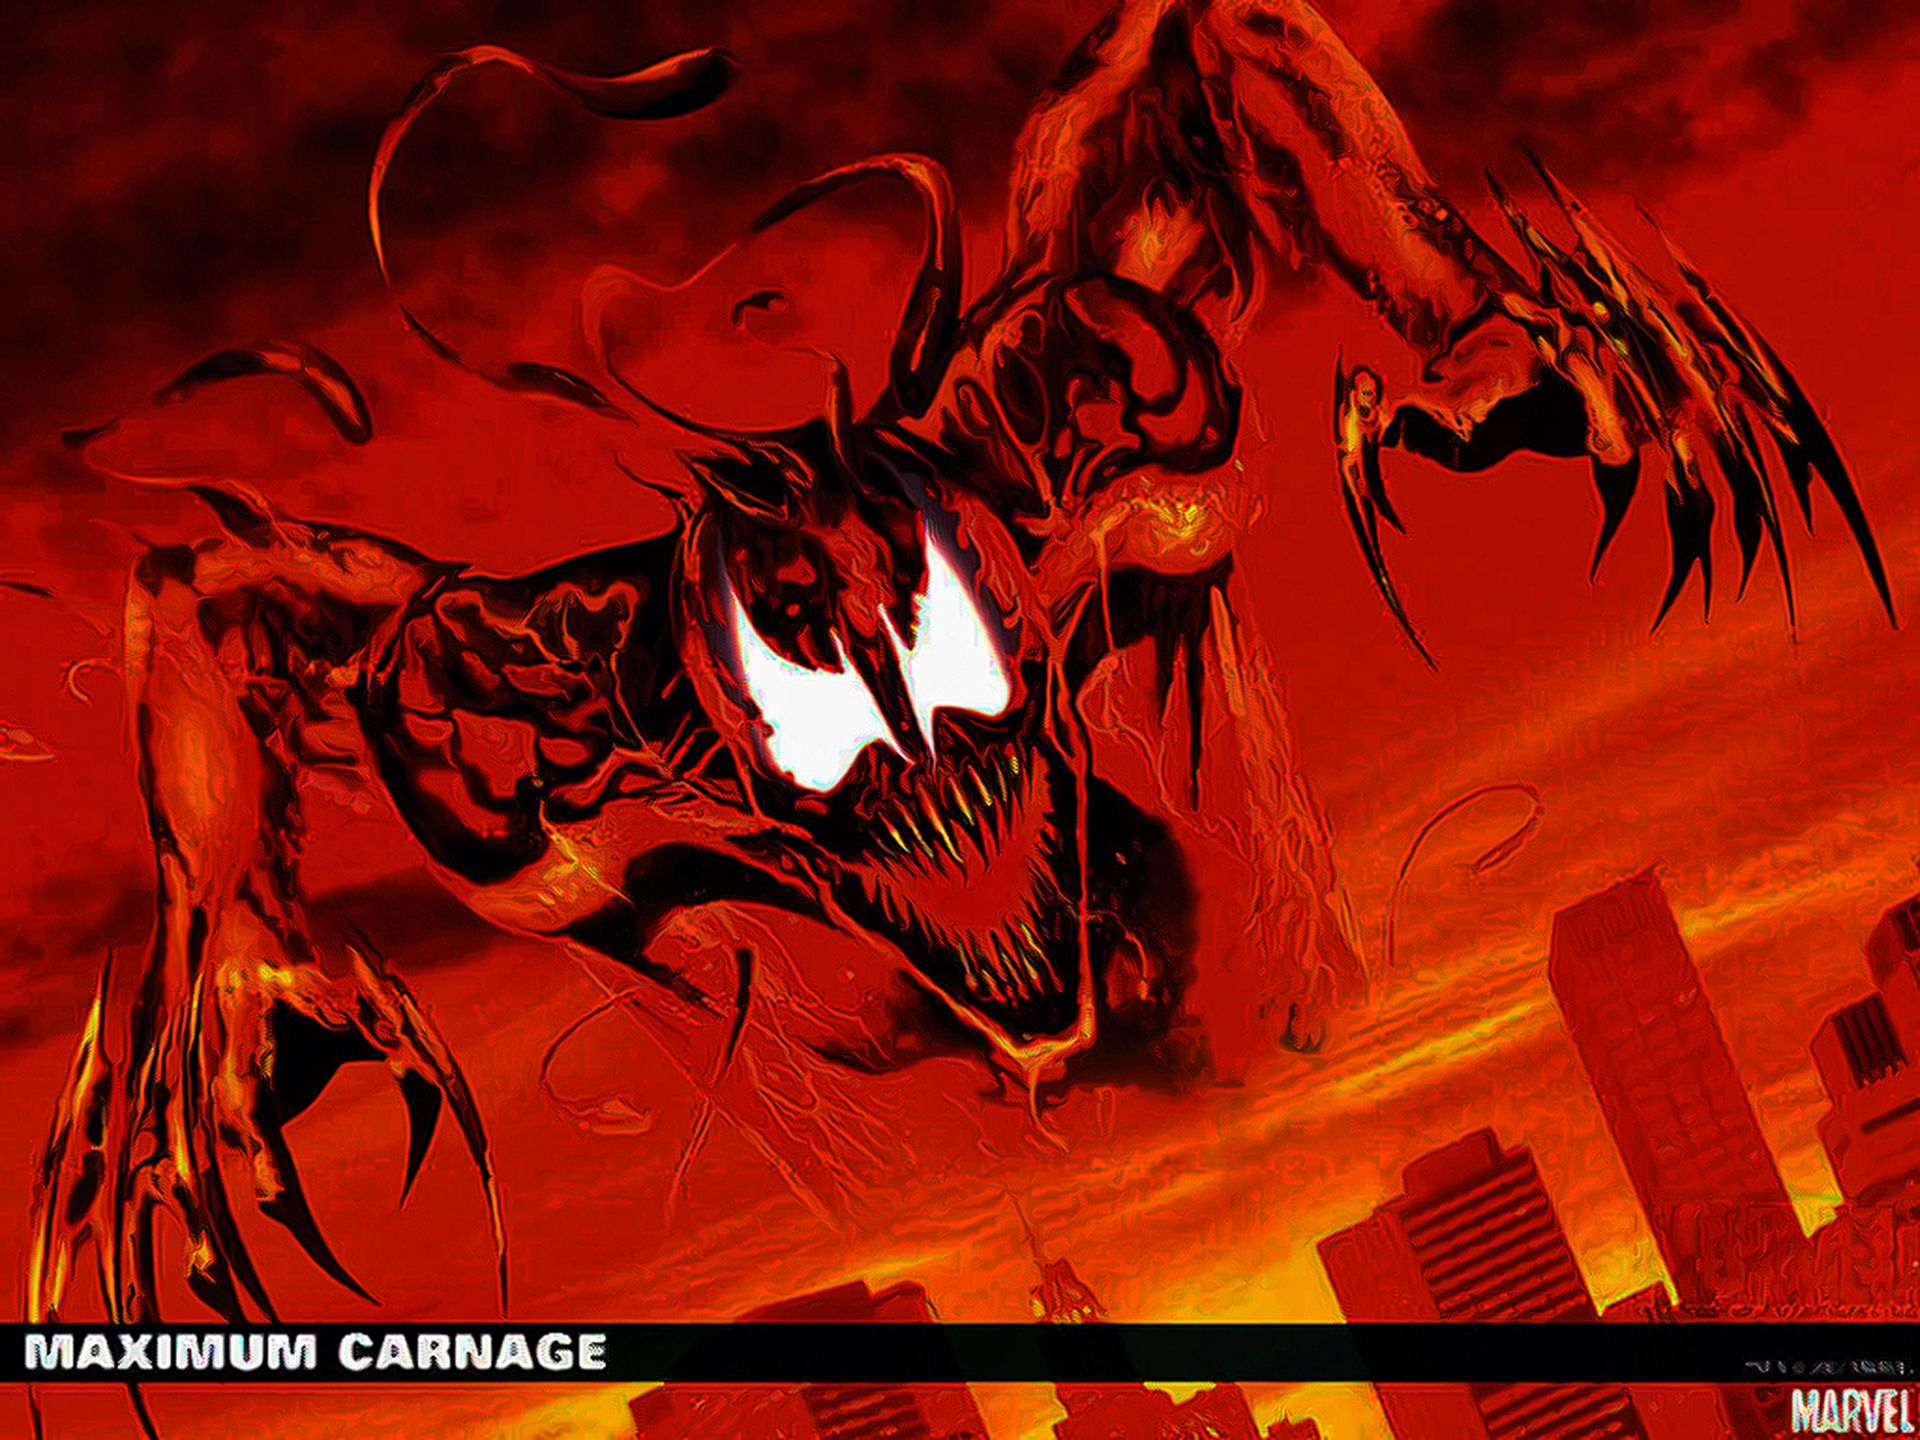 Free download Carnage wallpaper NEW Carnage club Wallpaper 31990485 [1920x1440] for your Desktop, Mobile & Tablet. Explore Carnage Wallpaper. Spiderman Venom Wallpaper, Venom Wallpaper, Carnage Wallpaper HD